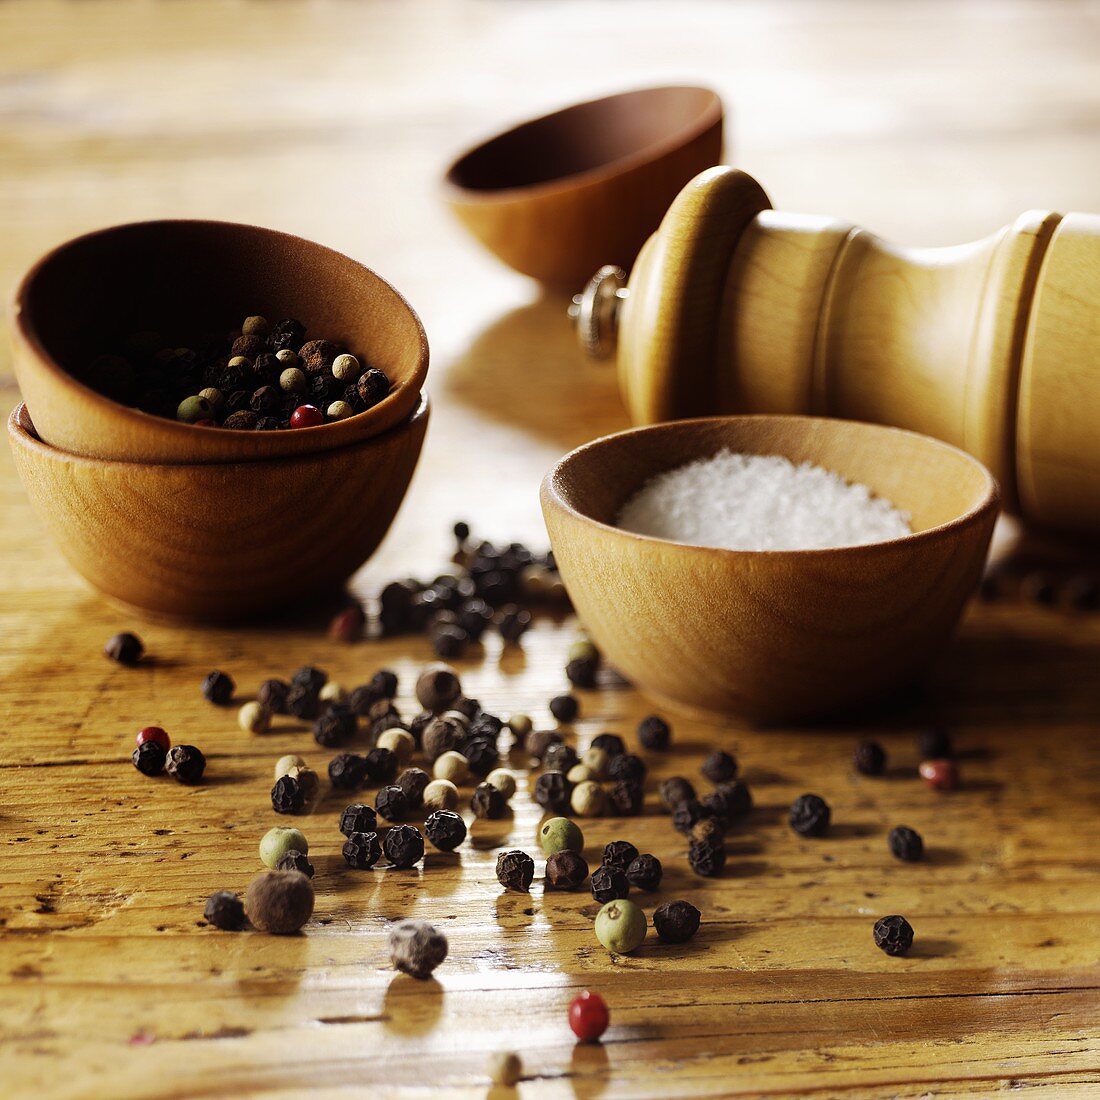 Peppercorns and Salt with Grinder and Wooden Bowls